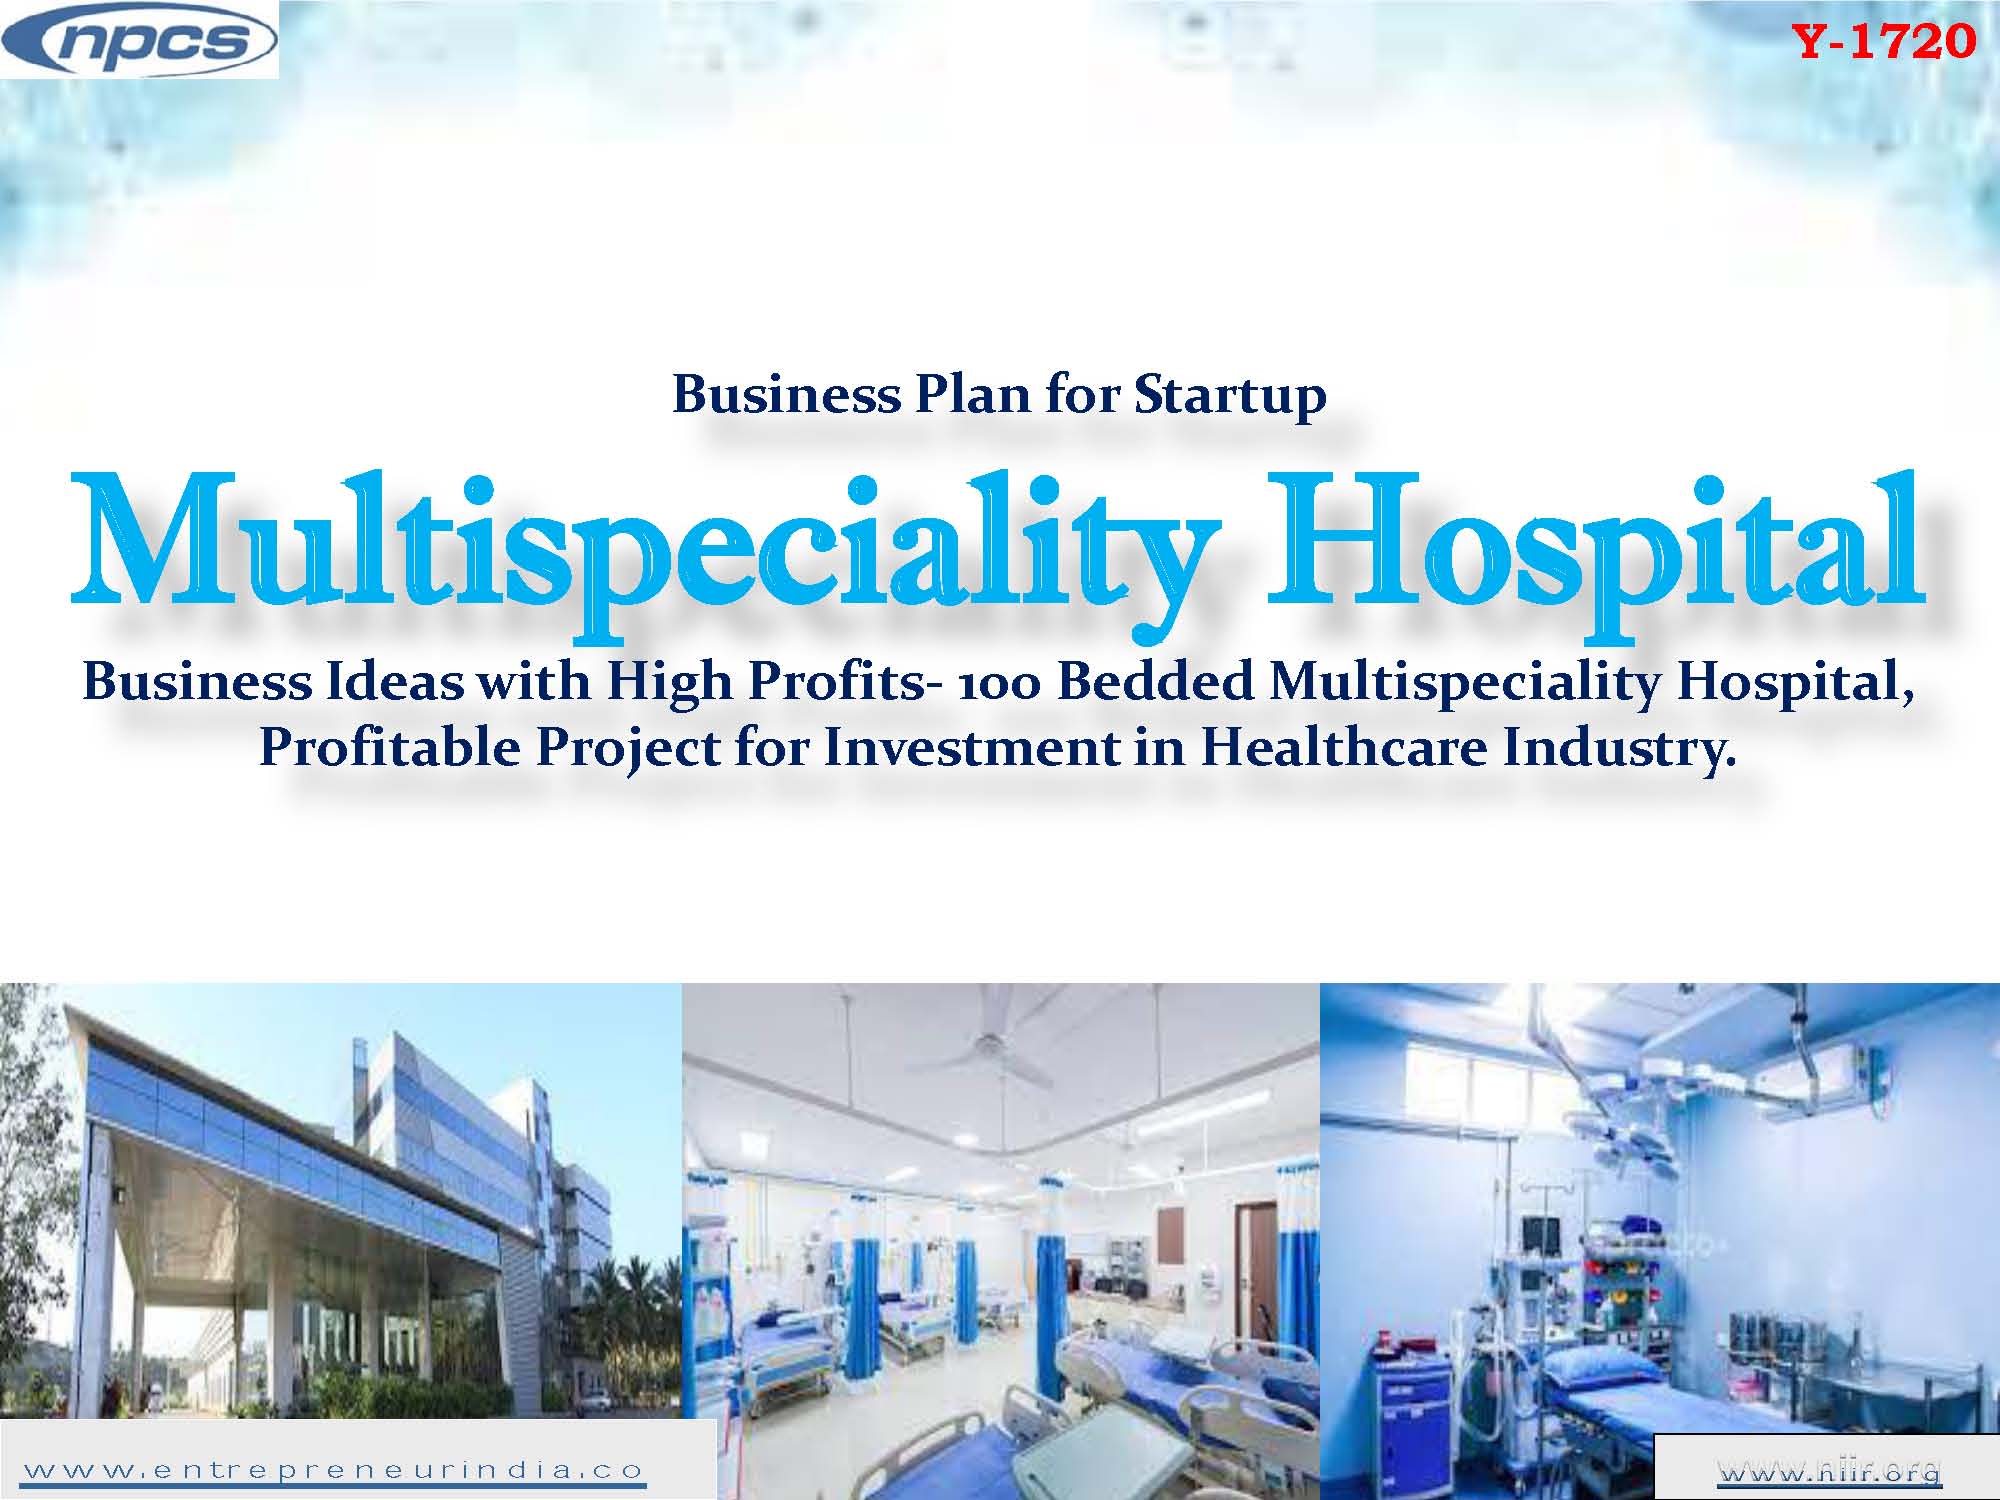 Business Plan for Startup Multispeciality Hospital Business Ideas with High Profits 100 Bedded Multispeciality Hospital Profitable Project for Investment in Healthcare Industry